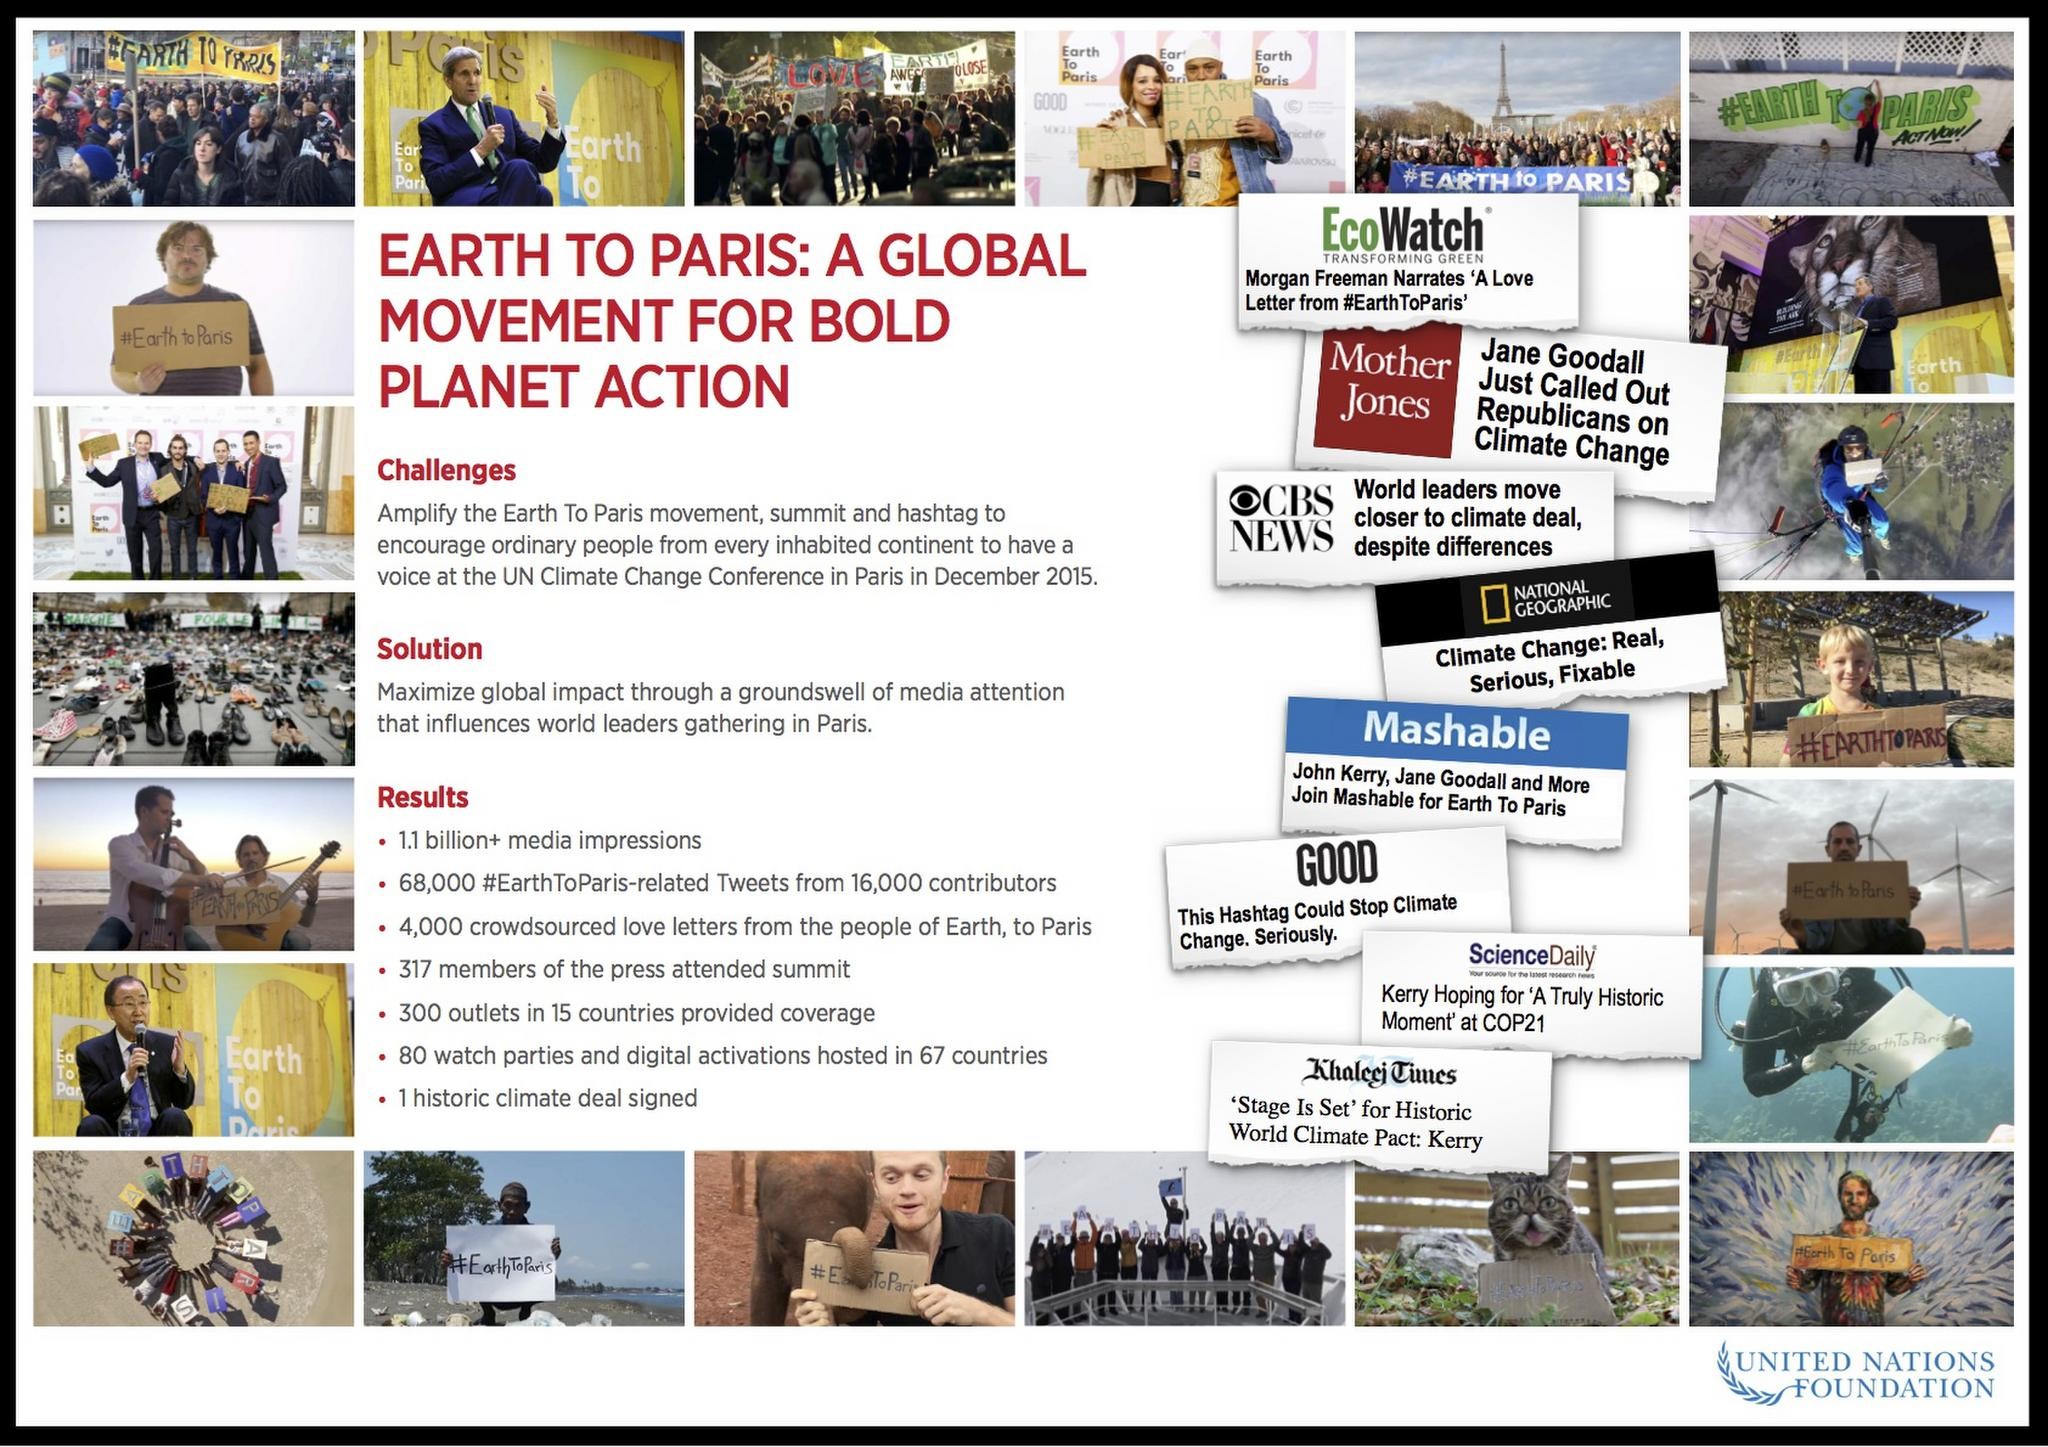 Earth To Paris: A Global Movement for Bold Planet Action